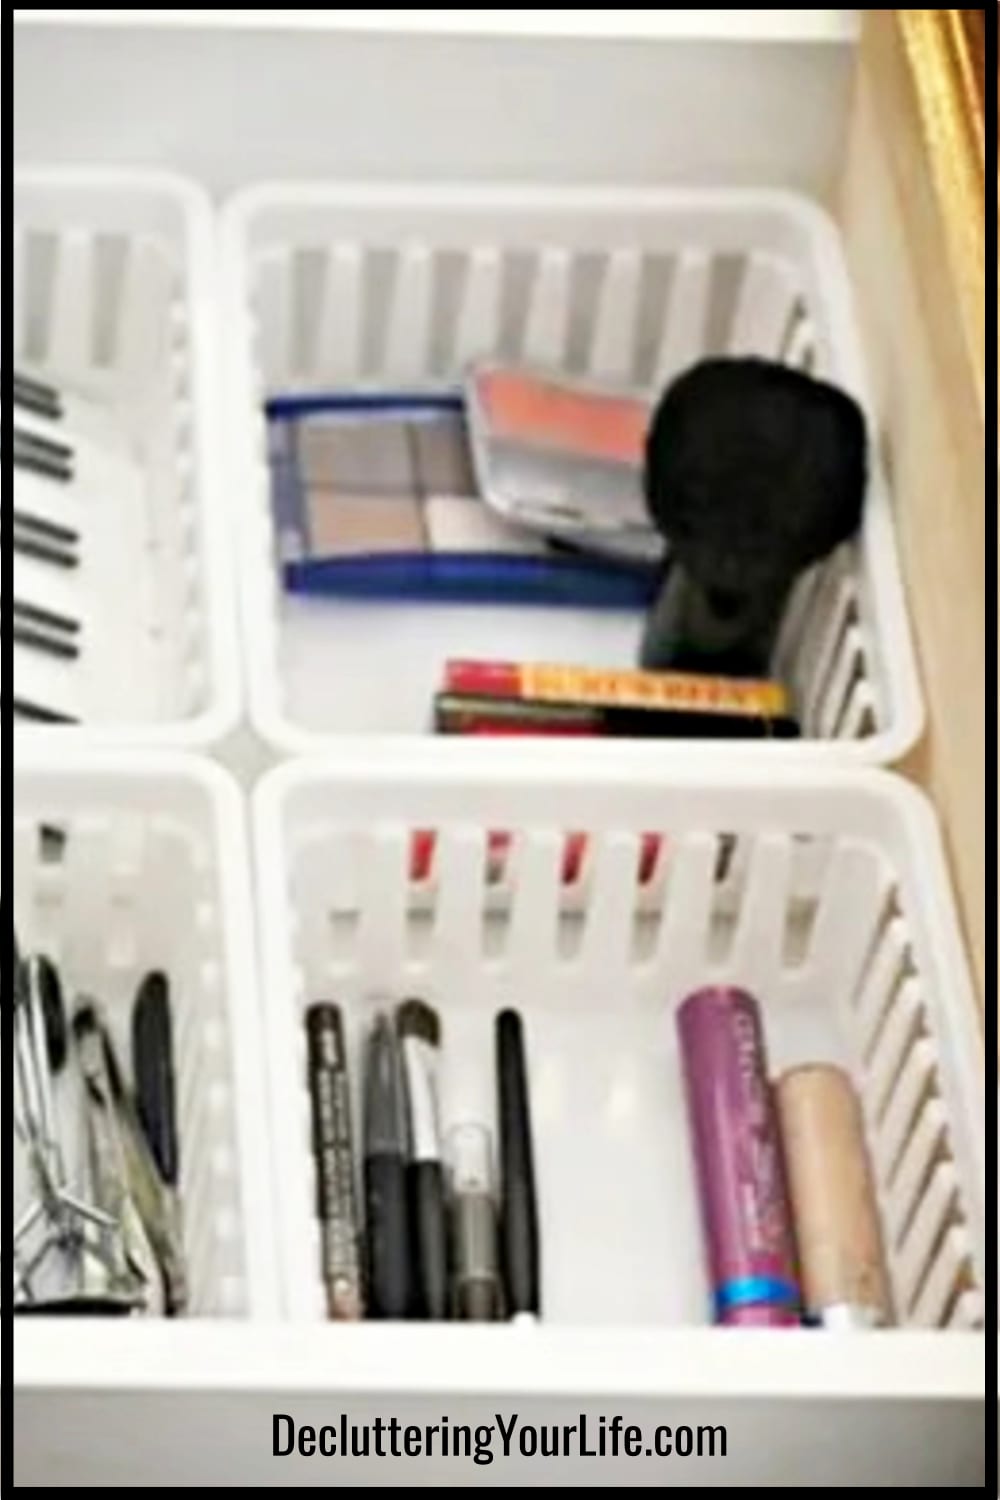 bathroom drawers with cheap Dollar Store baskets to organize makeup